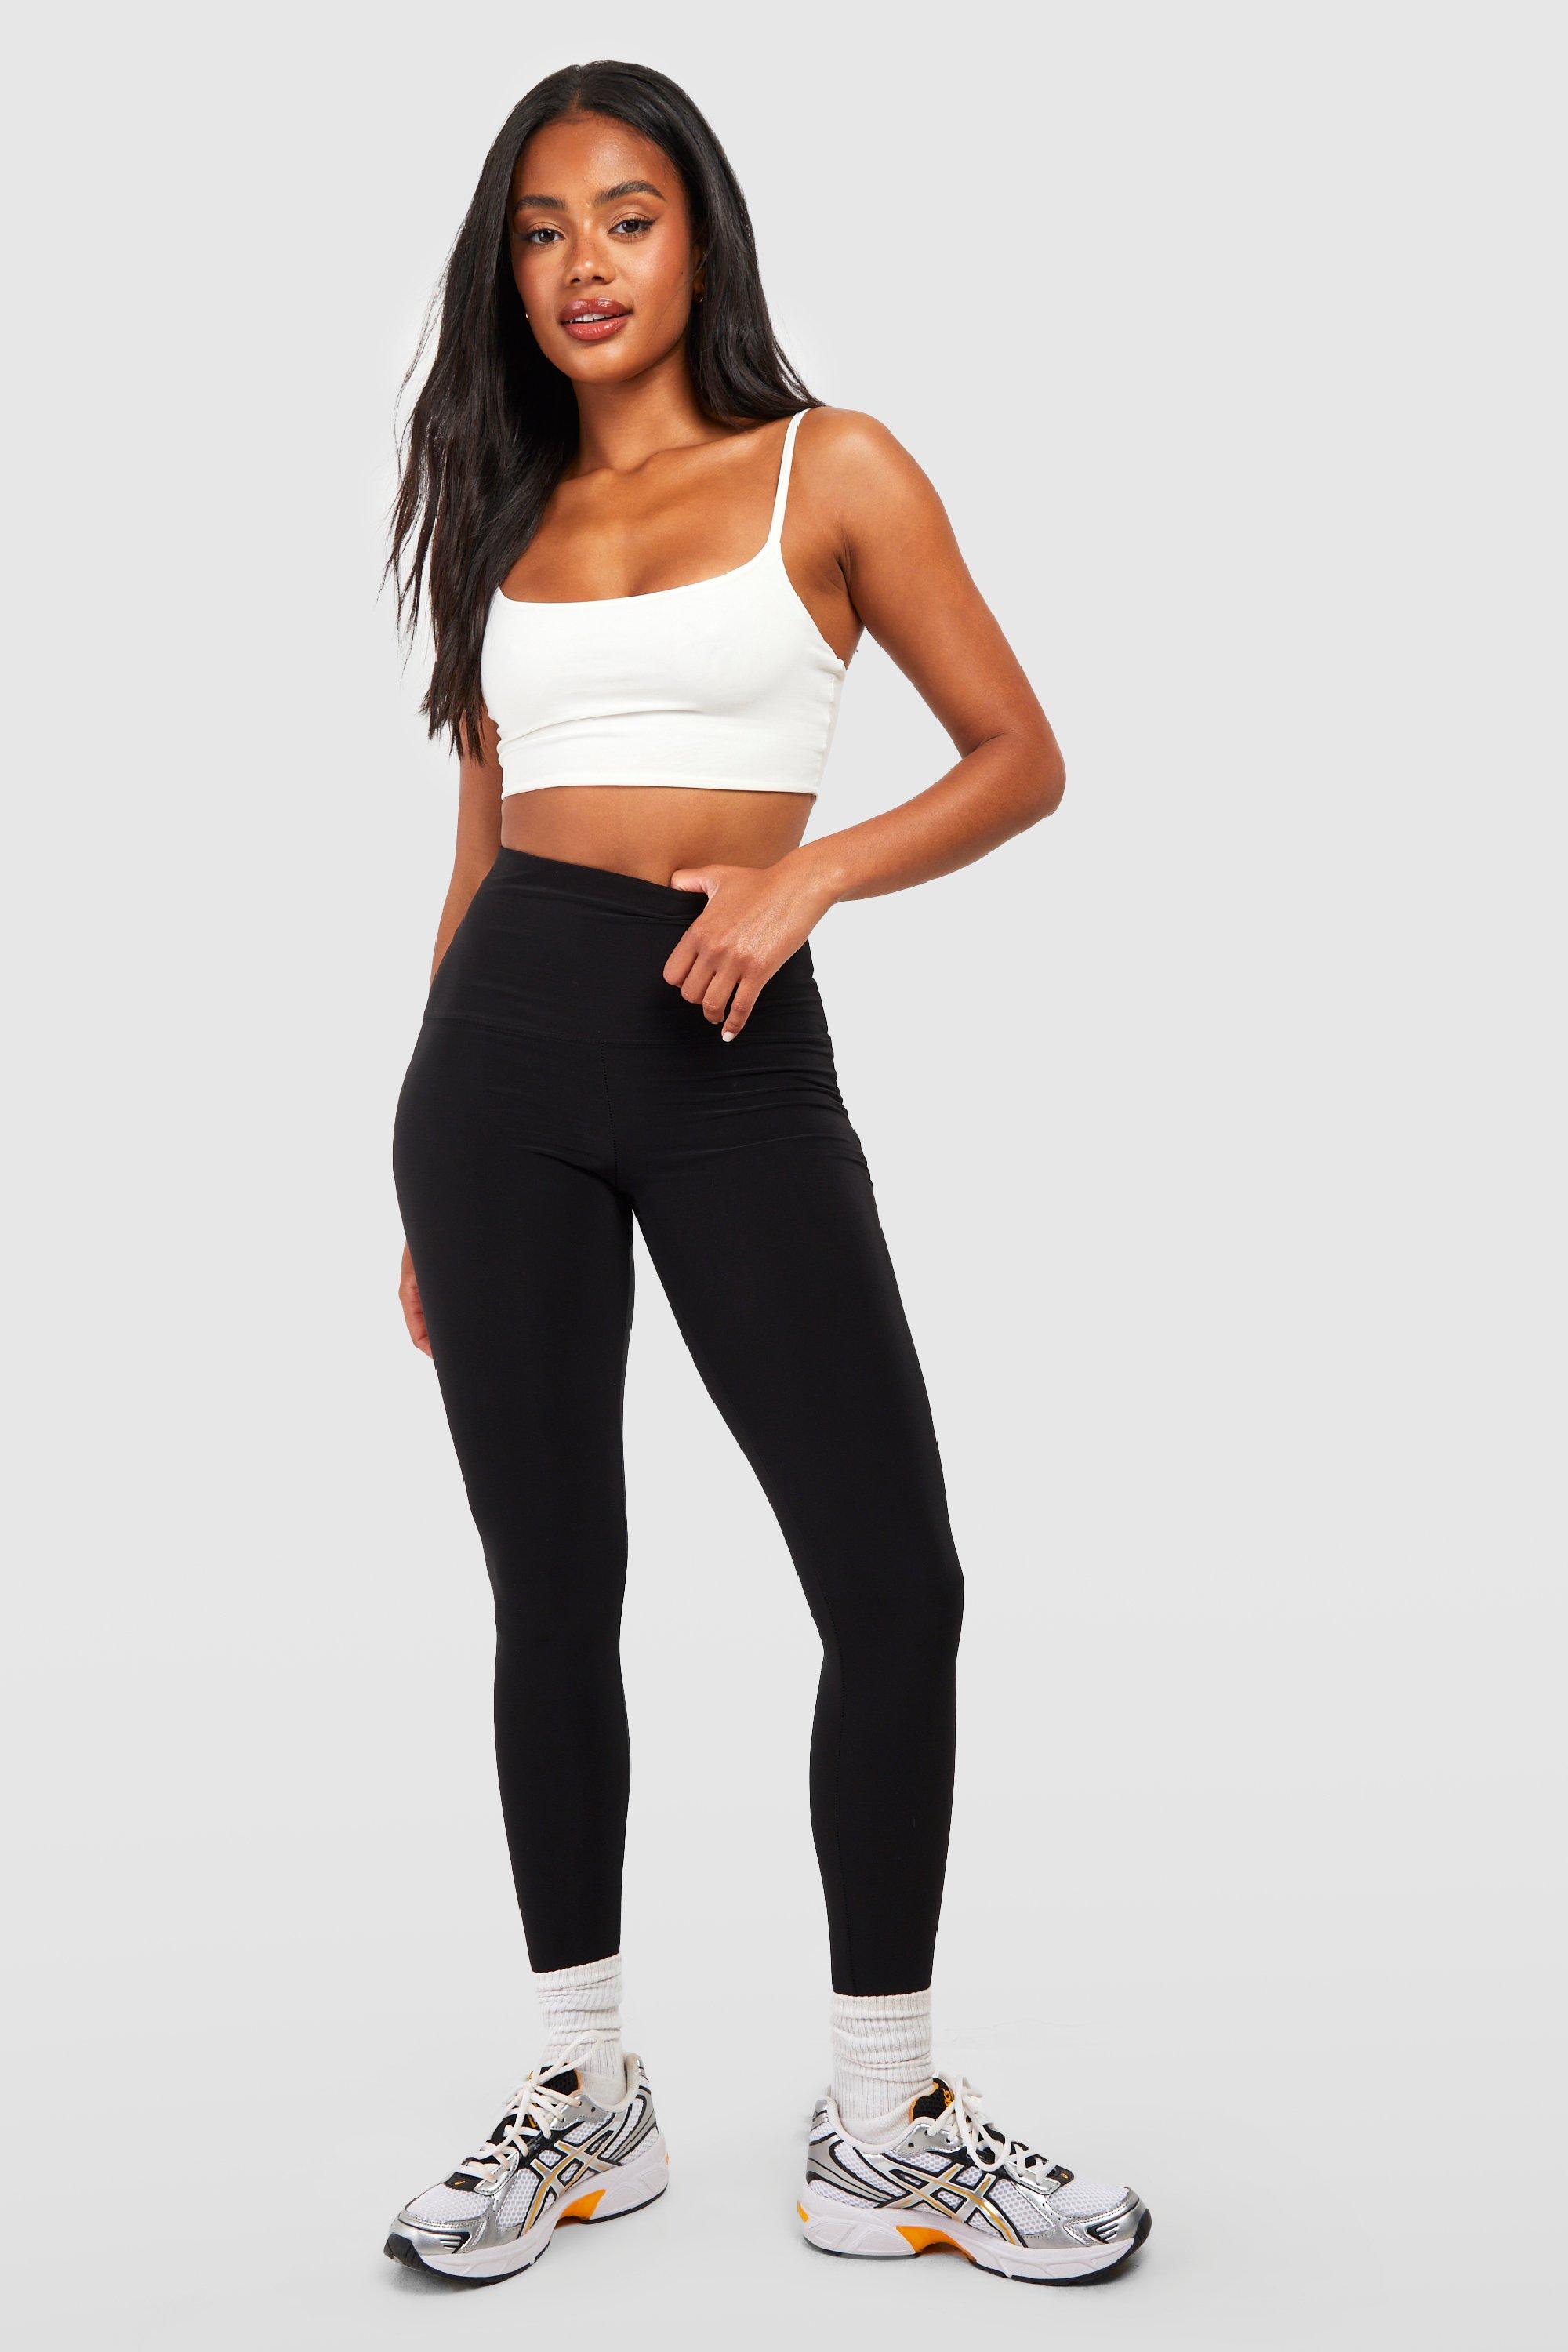 Stylish Double Layered Leggings and Crop Top